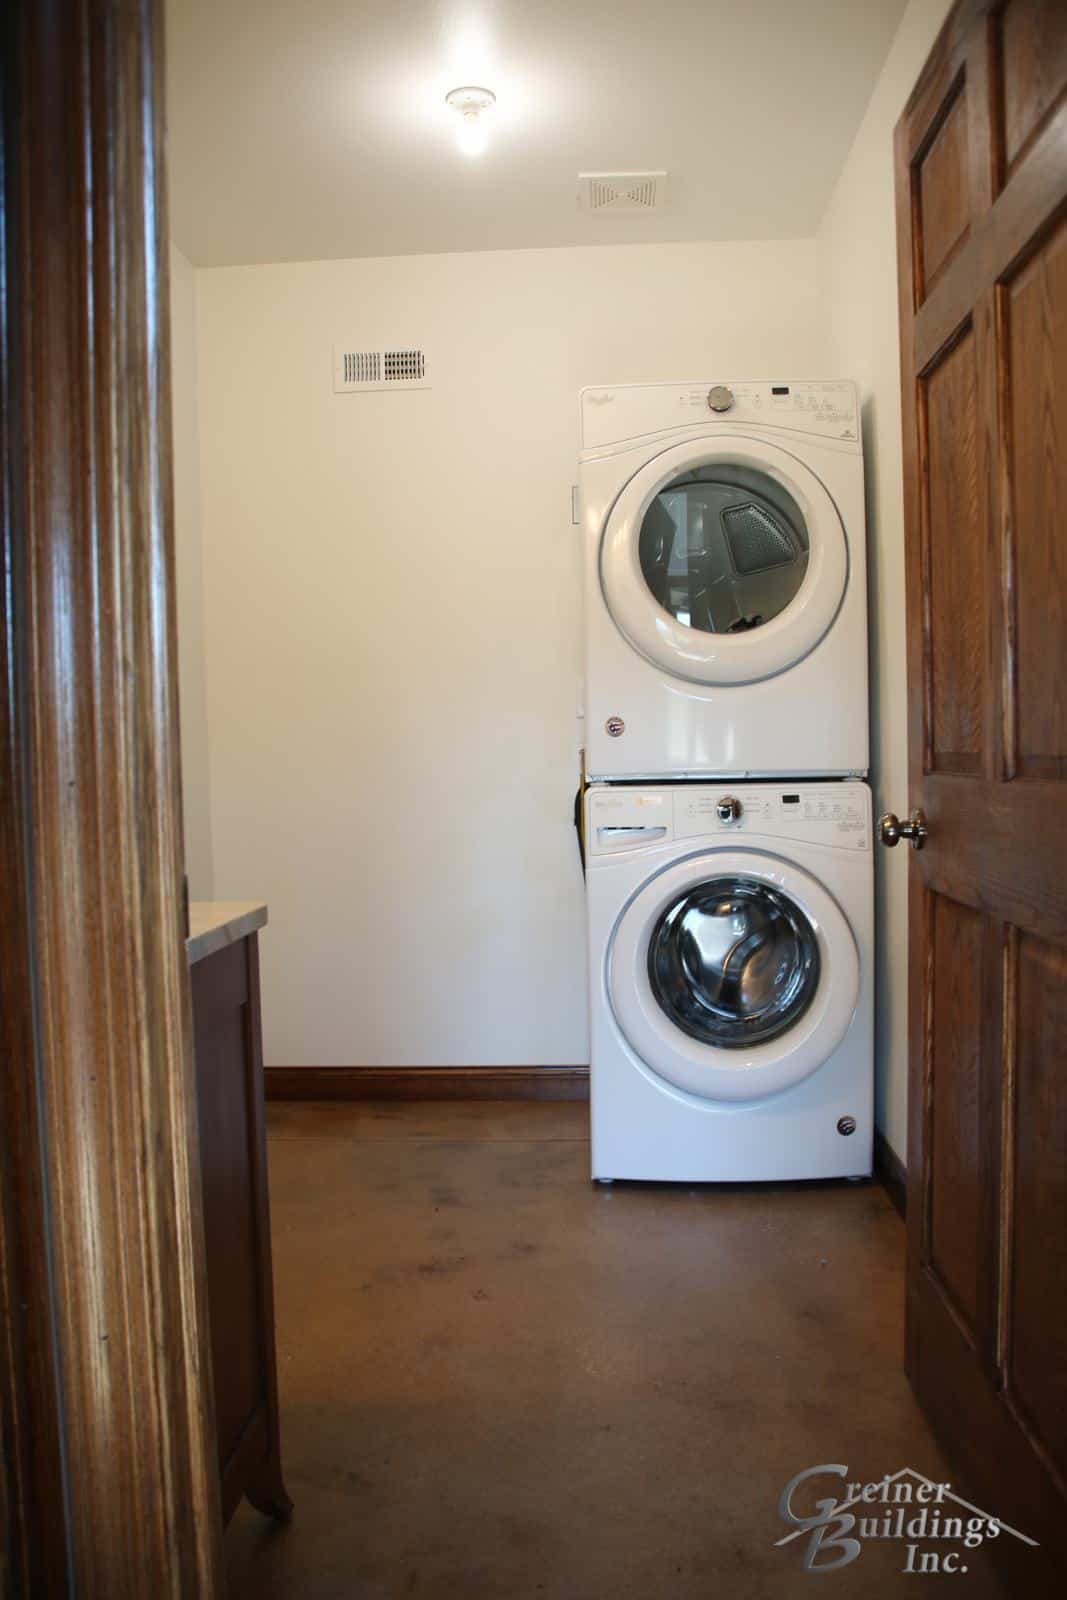 Shop Machine Shed Shome Man Cave Laundry Bath Muscatine, Iowa built by Greiner Buildings